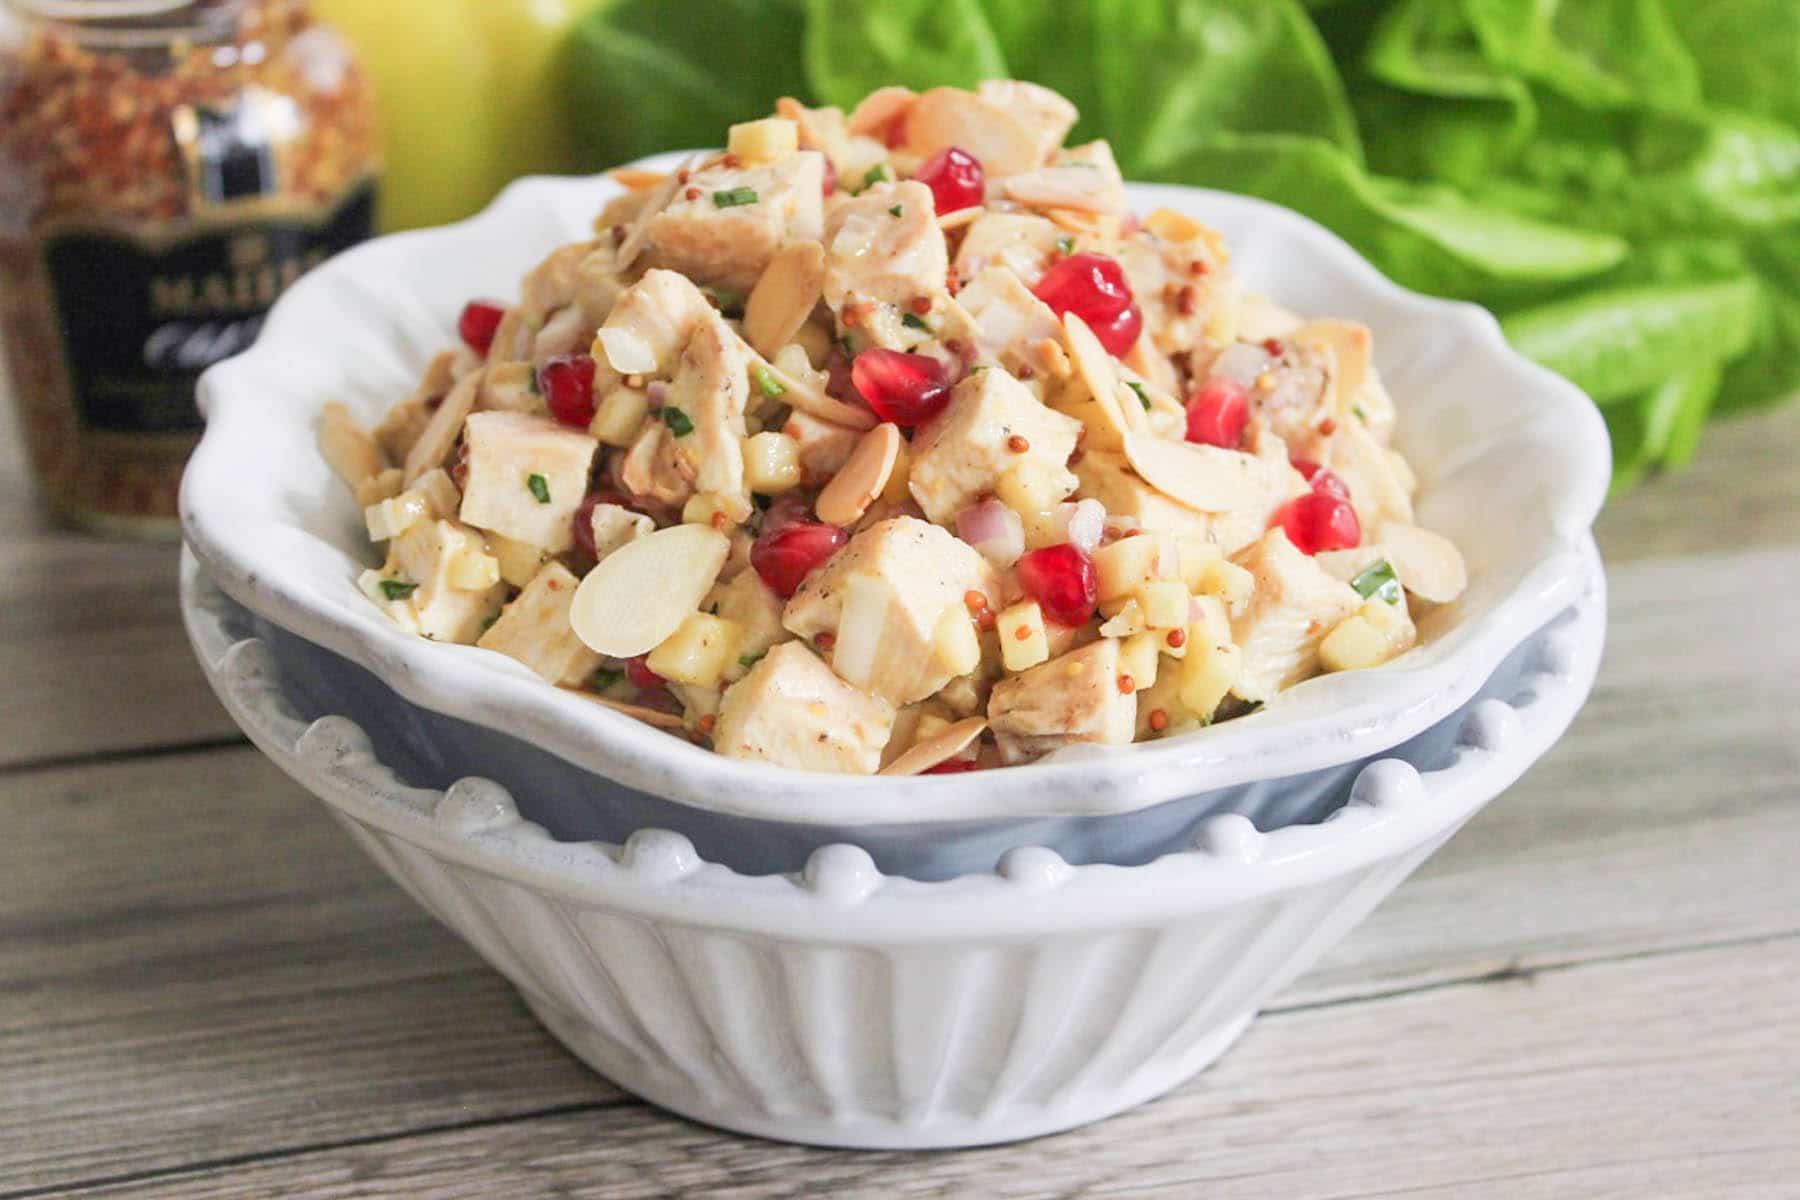 lemon-dijon-chicken-salad-with-pomegranate-and-toasted-almonds-7